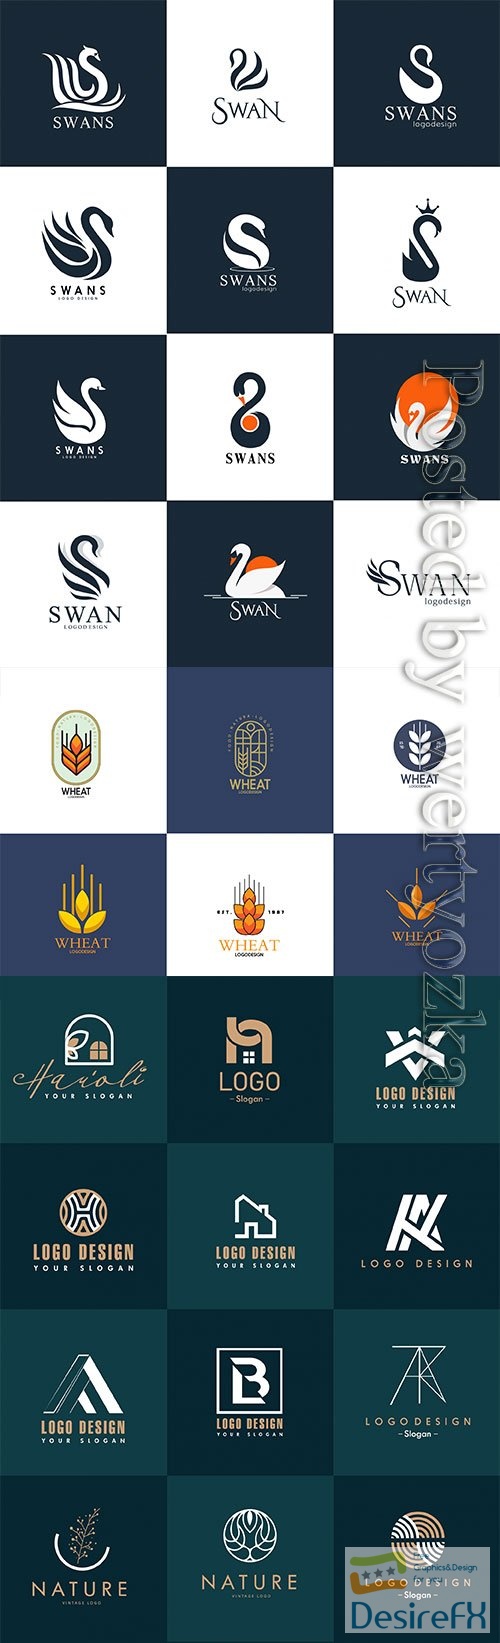 Set of different logos for business companies in vector